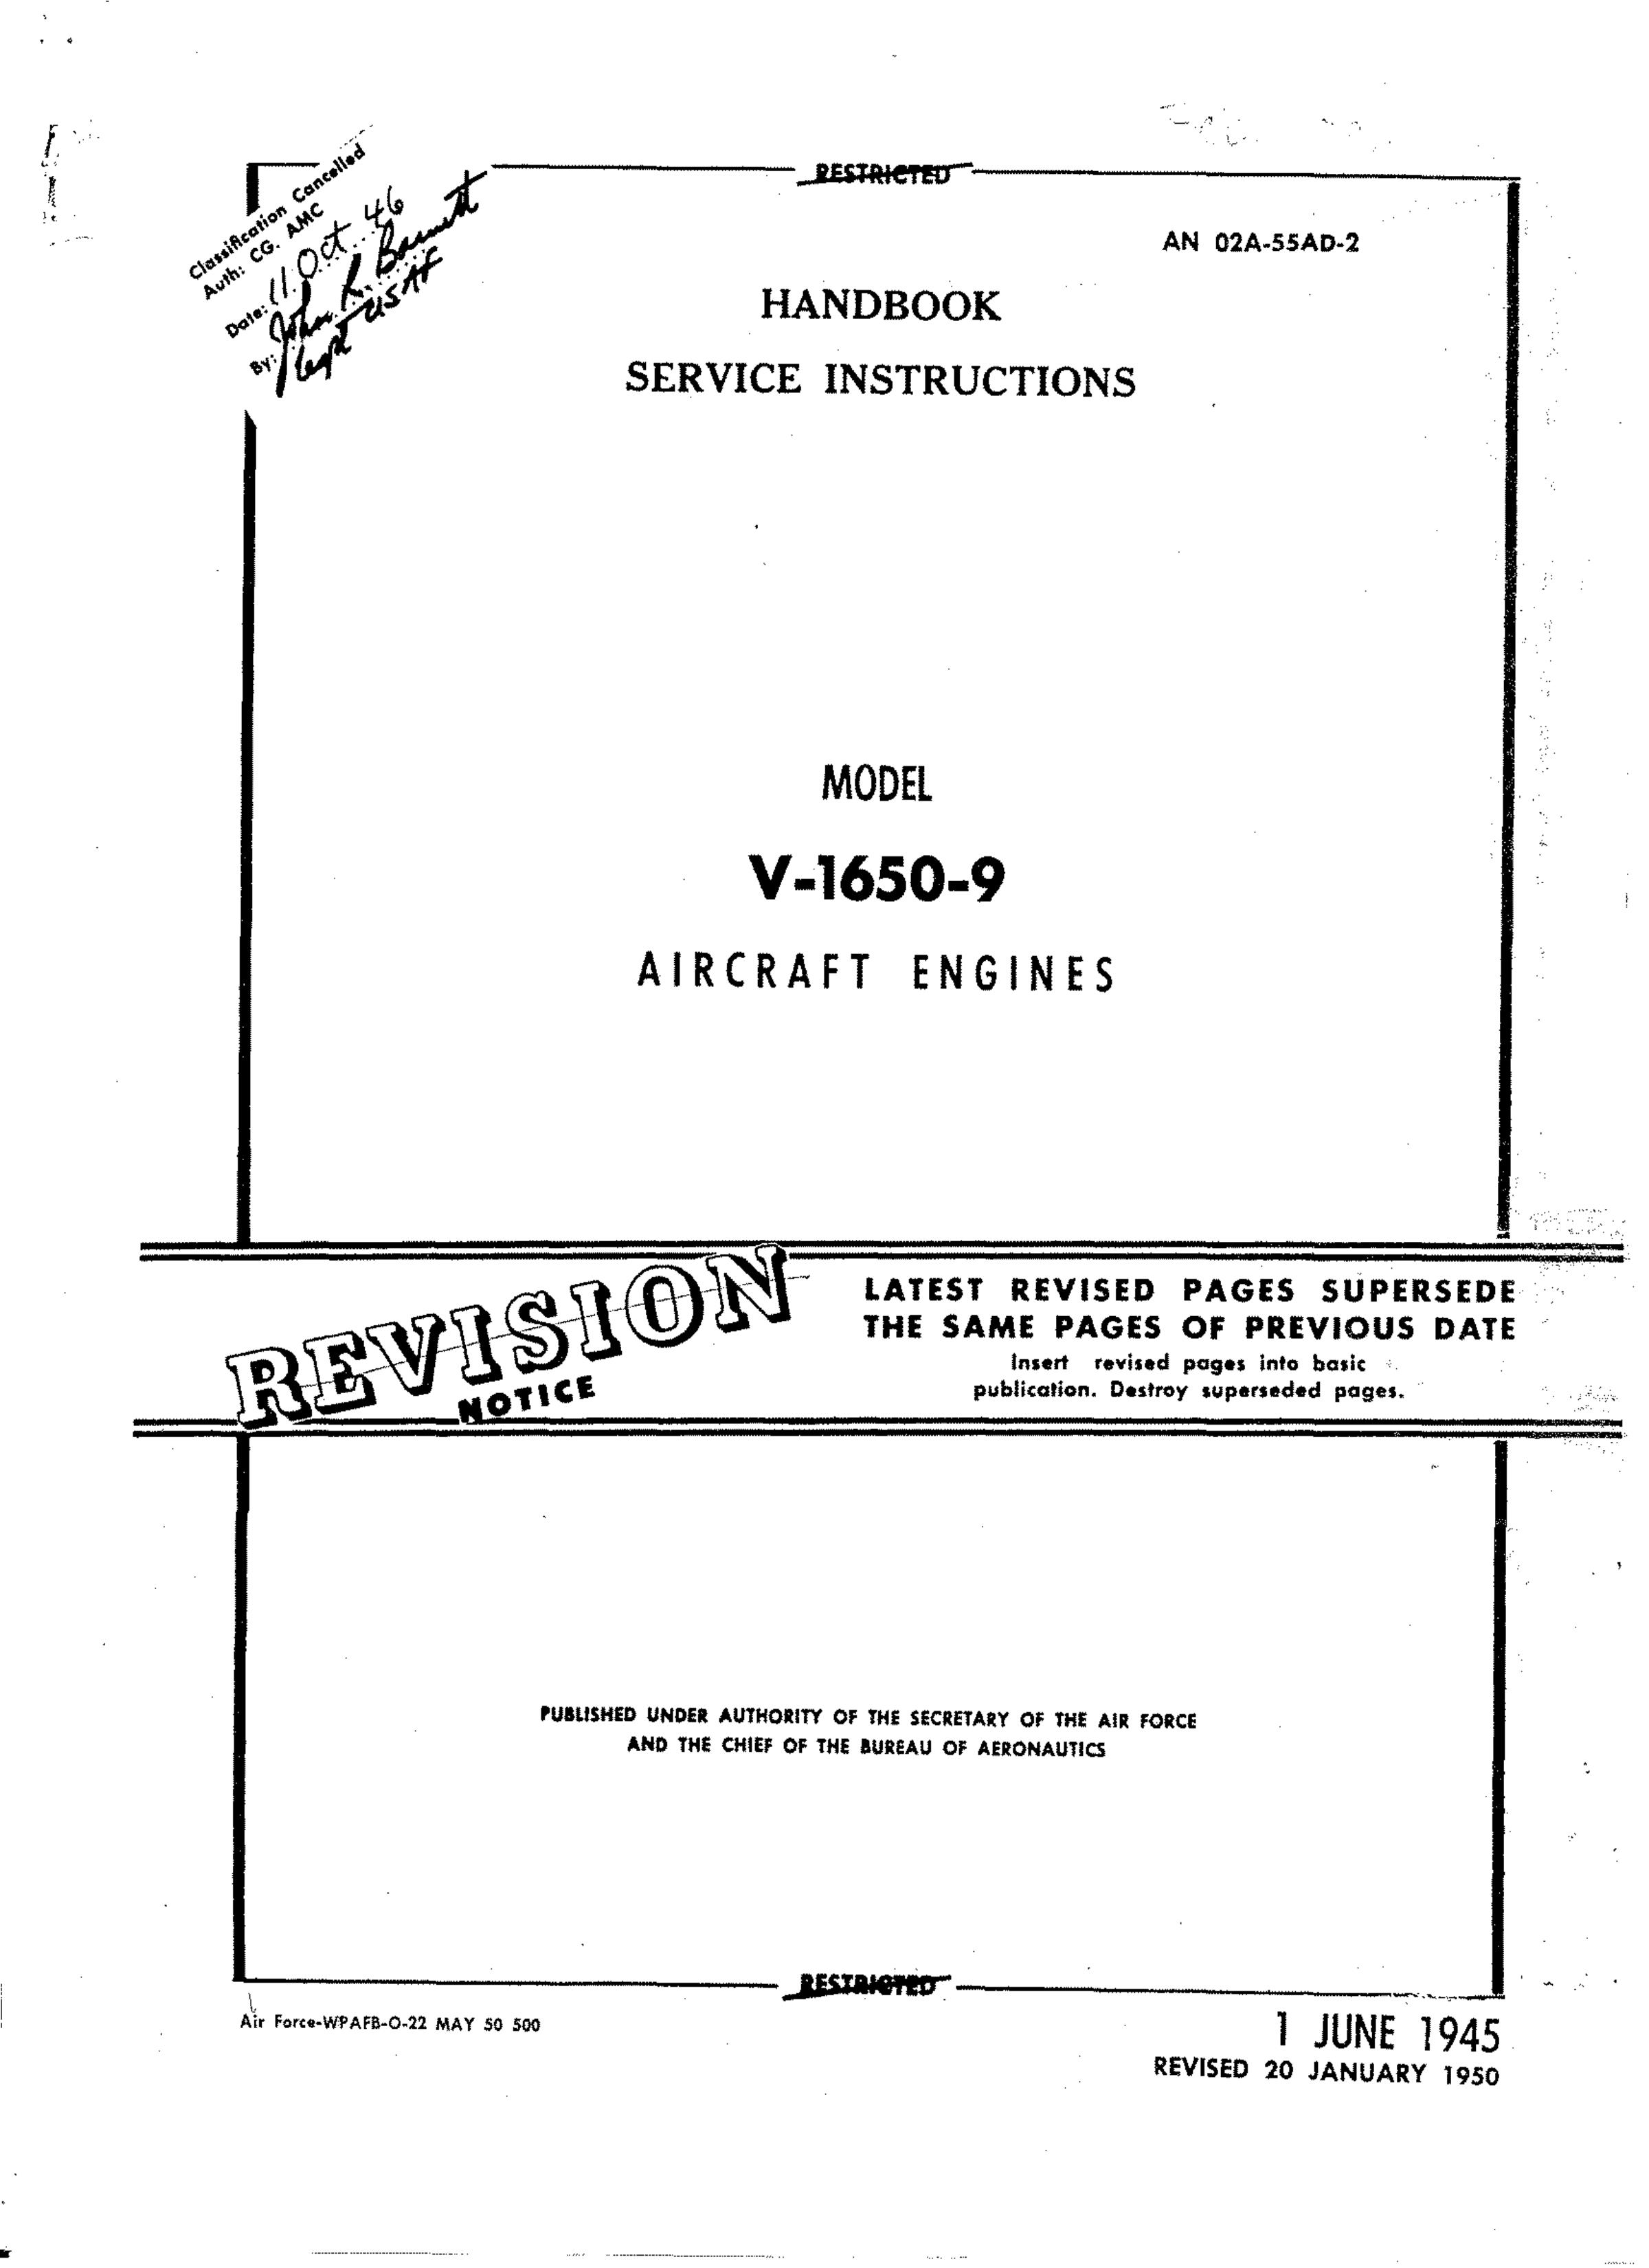 Sample page 1 from AirCorps Library document: Service Instructions for Model V-1650-9 Aircraft Engines